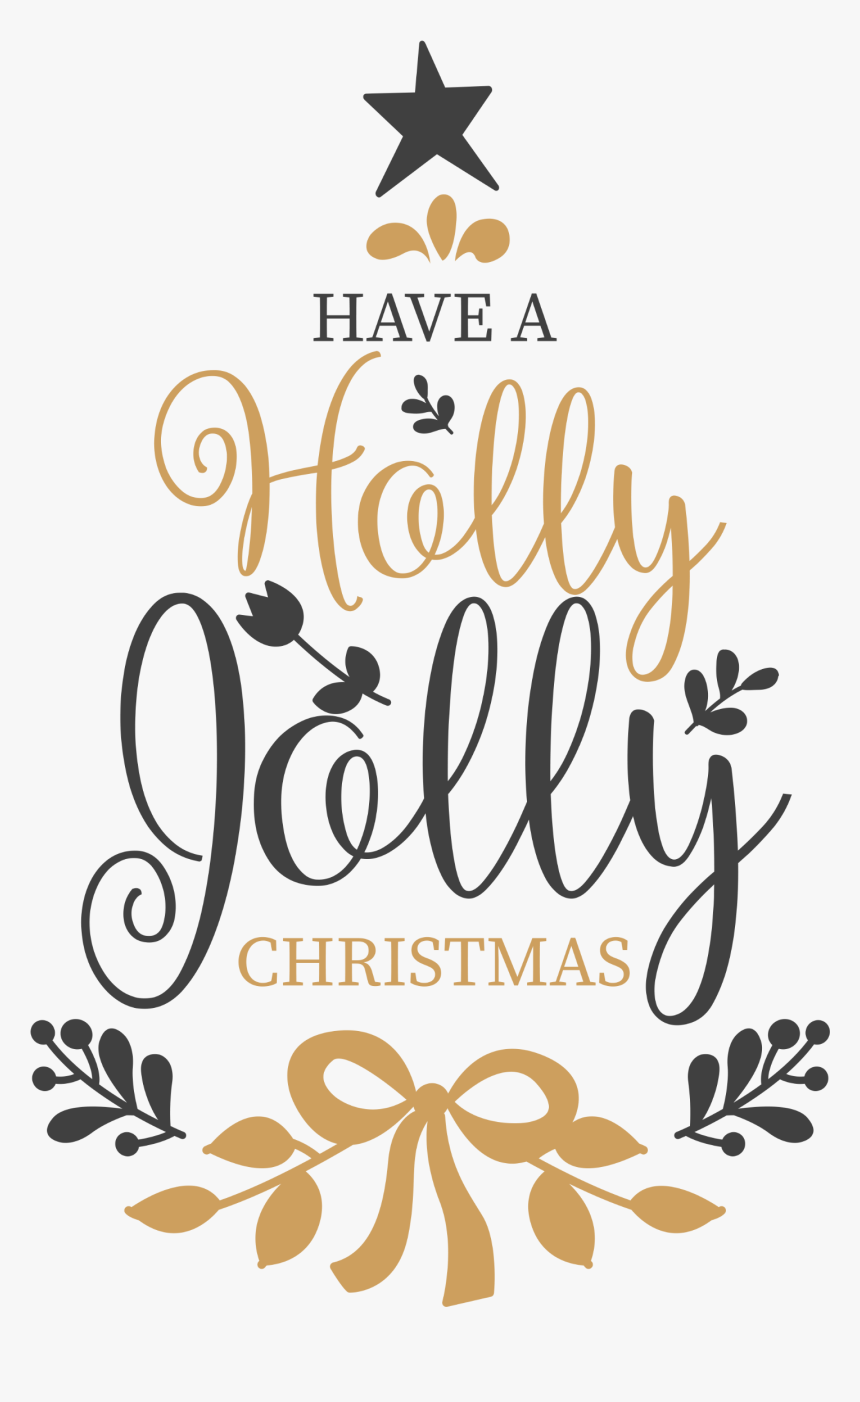 #christmas #text #holly #jolly #star #song #quote #png, Transparent Png, Free Download